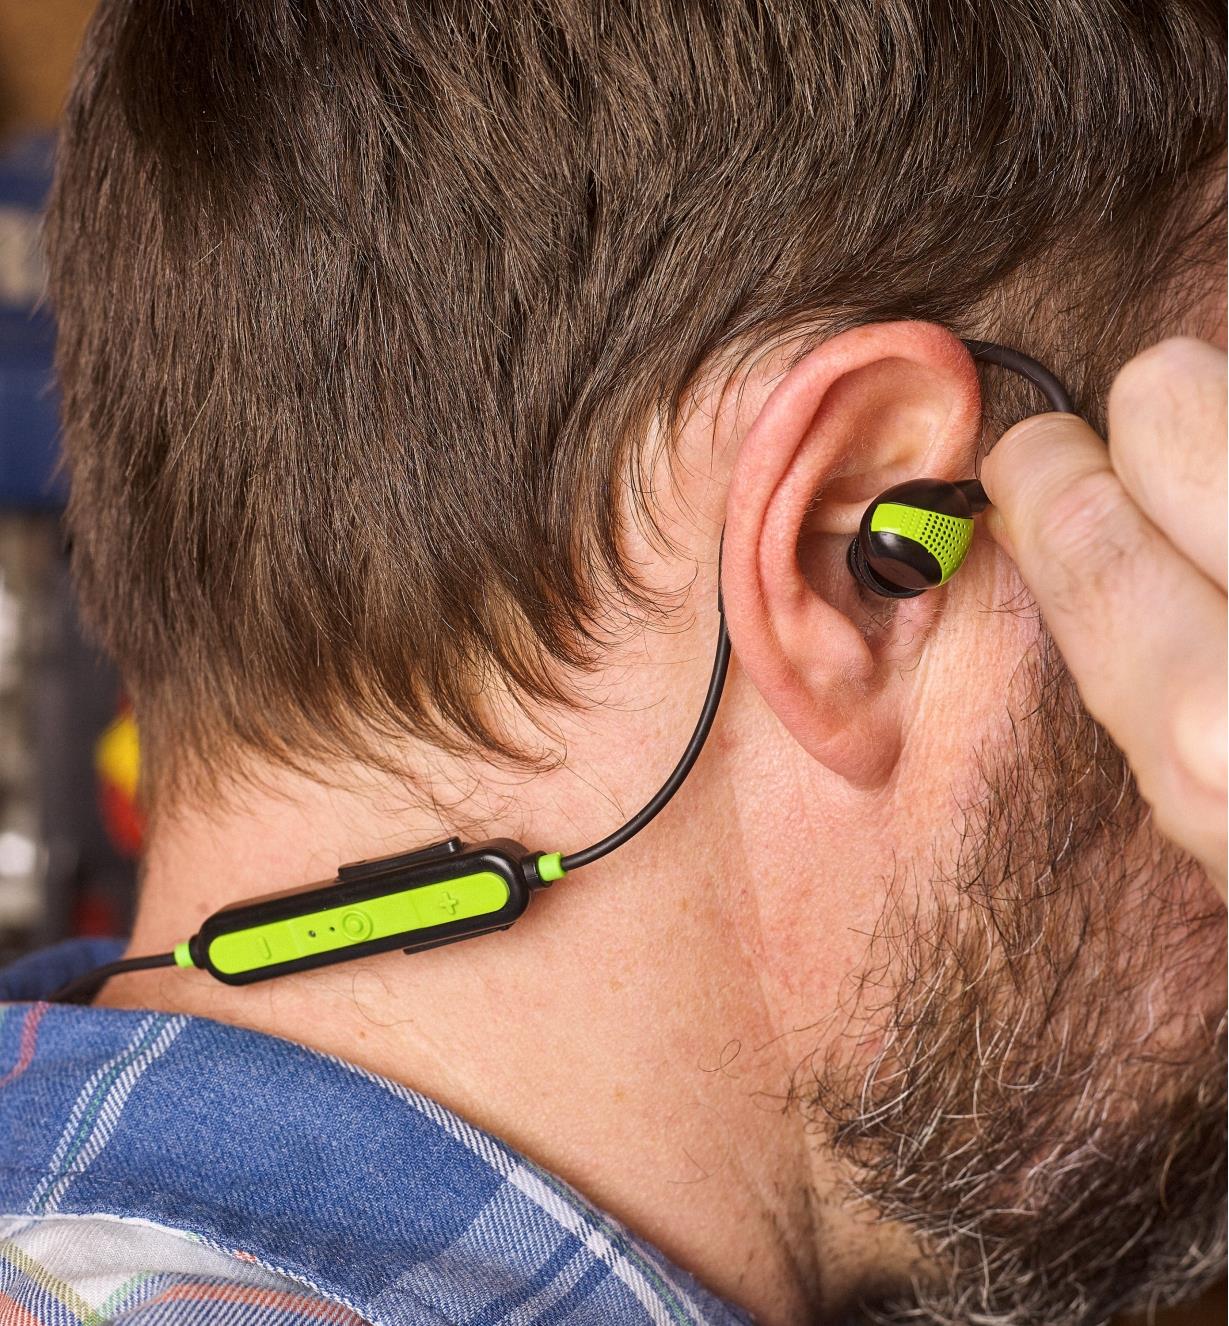 Placing an ISOTunes PRO Aware hearing protector earbud in the ear, with the earbud wire shaped around the outside of the ear